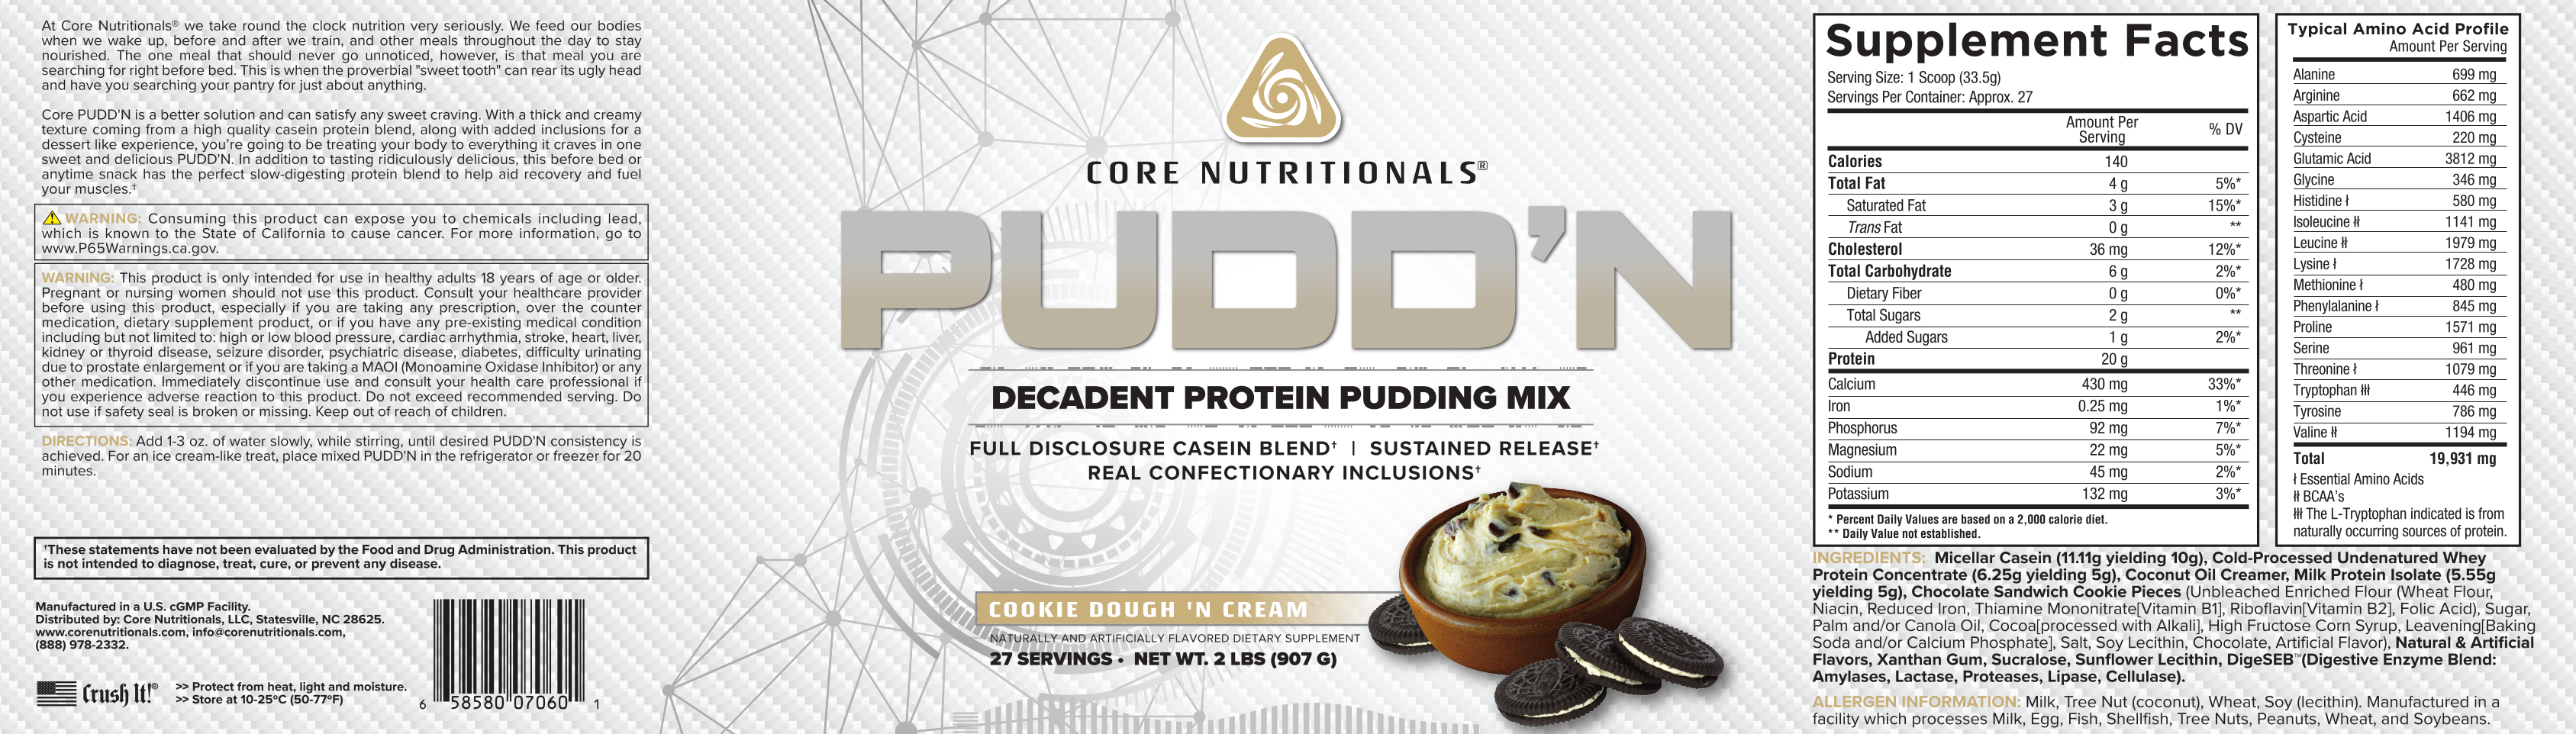 CORE PUDD'N Cookie Dough Label